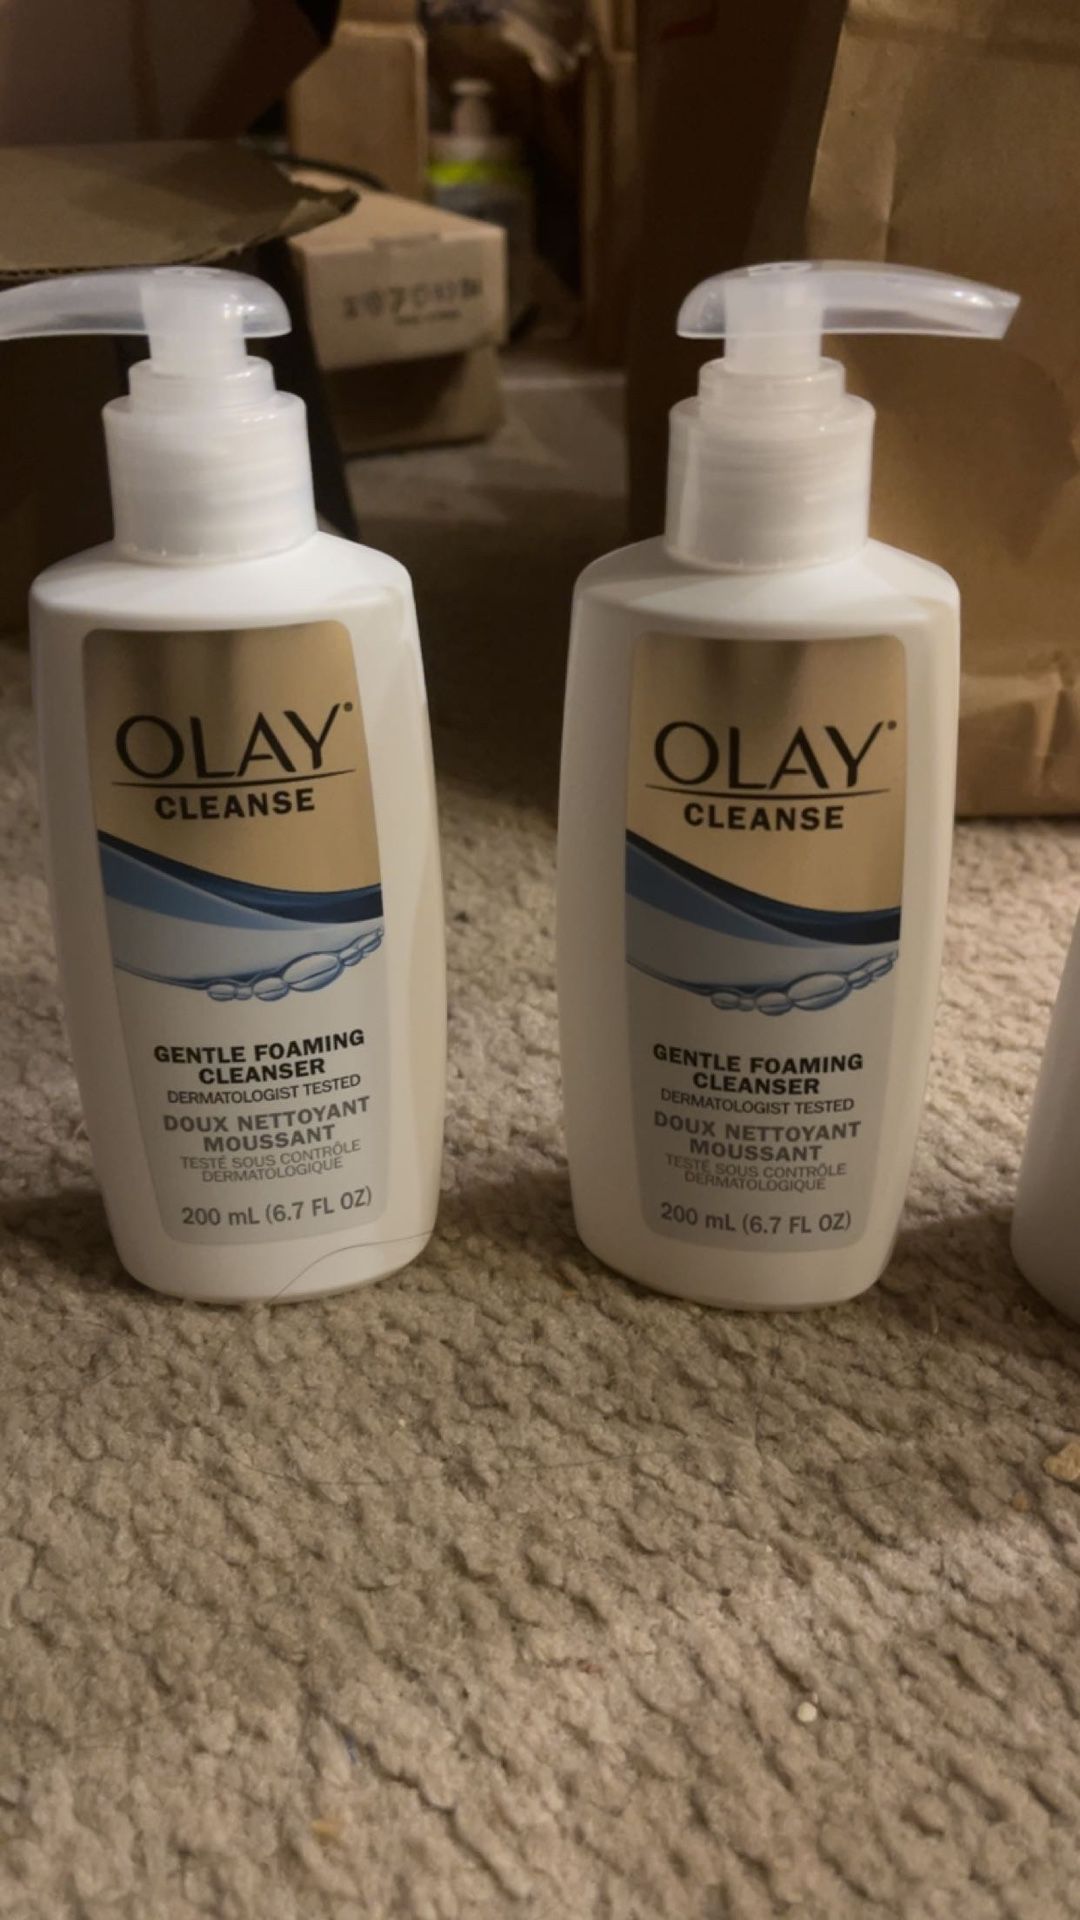 Newly purchased.  Take all for only $10  2 Olay gentle foaming (200 ml per bottle) Dove shampoo (355 ml) 3 old spice body wash (89ml per bottle)